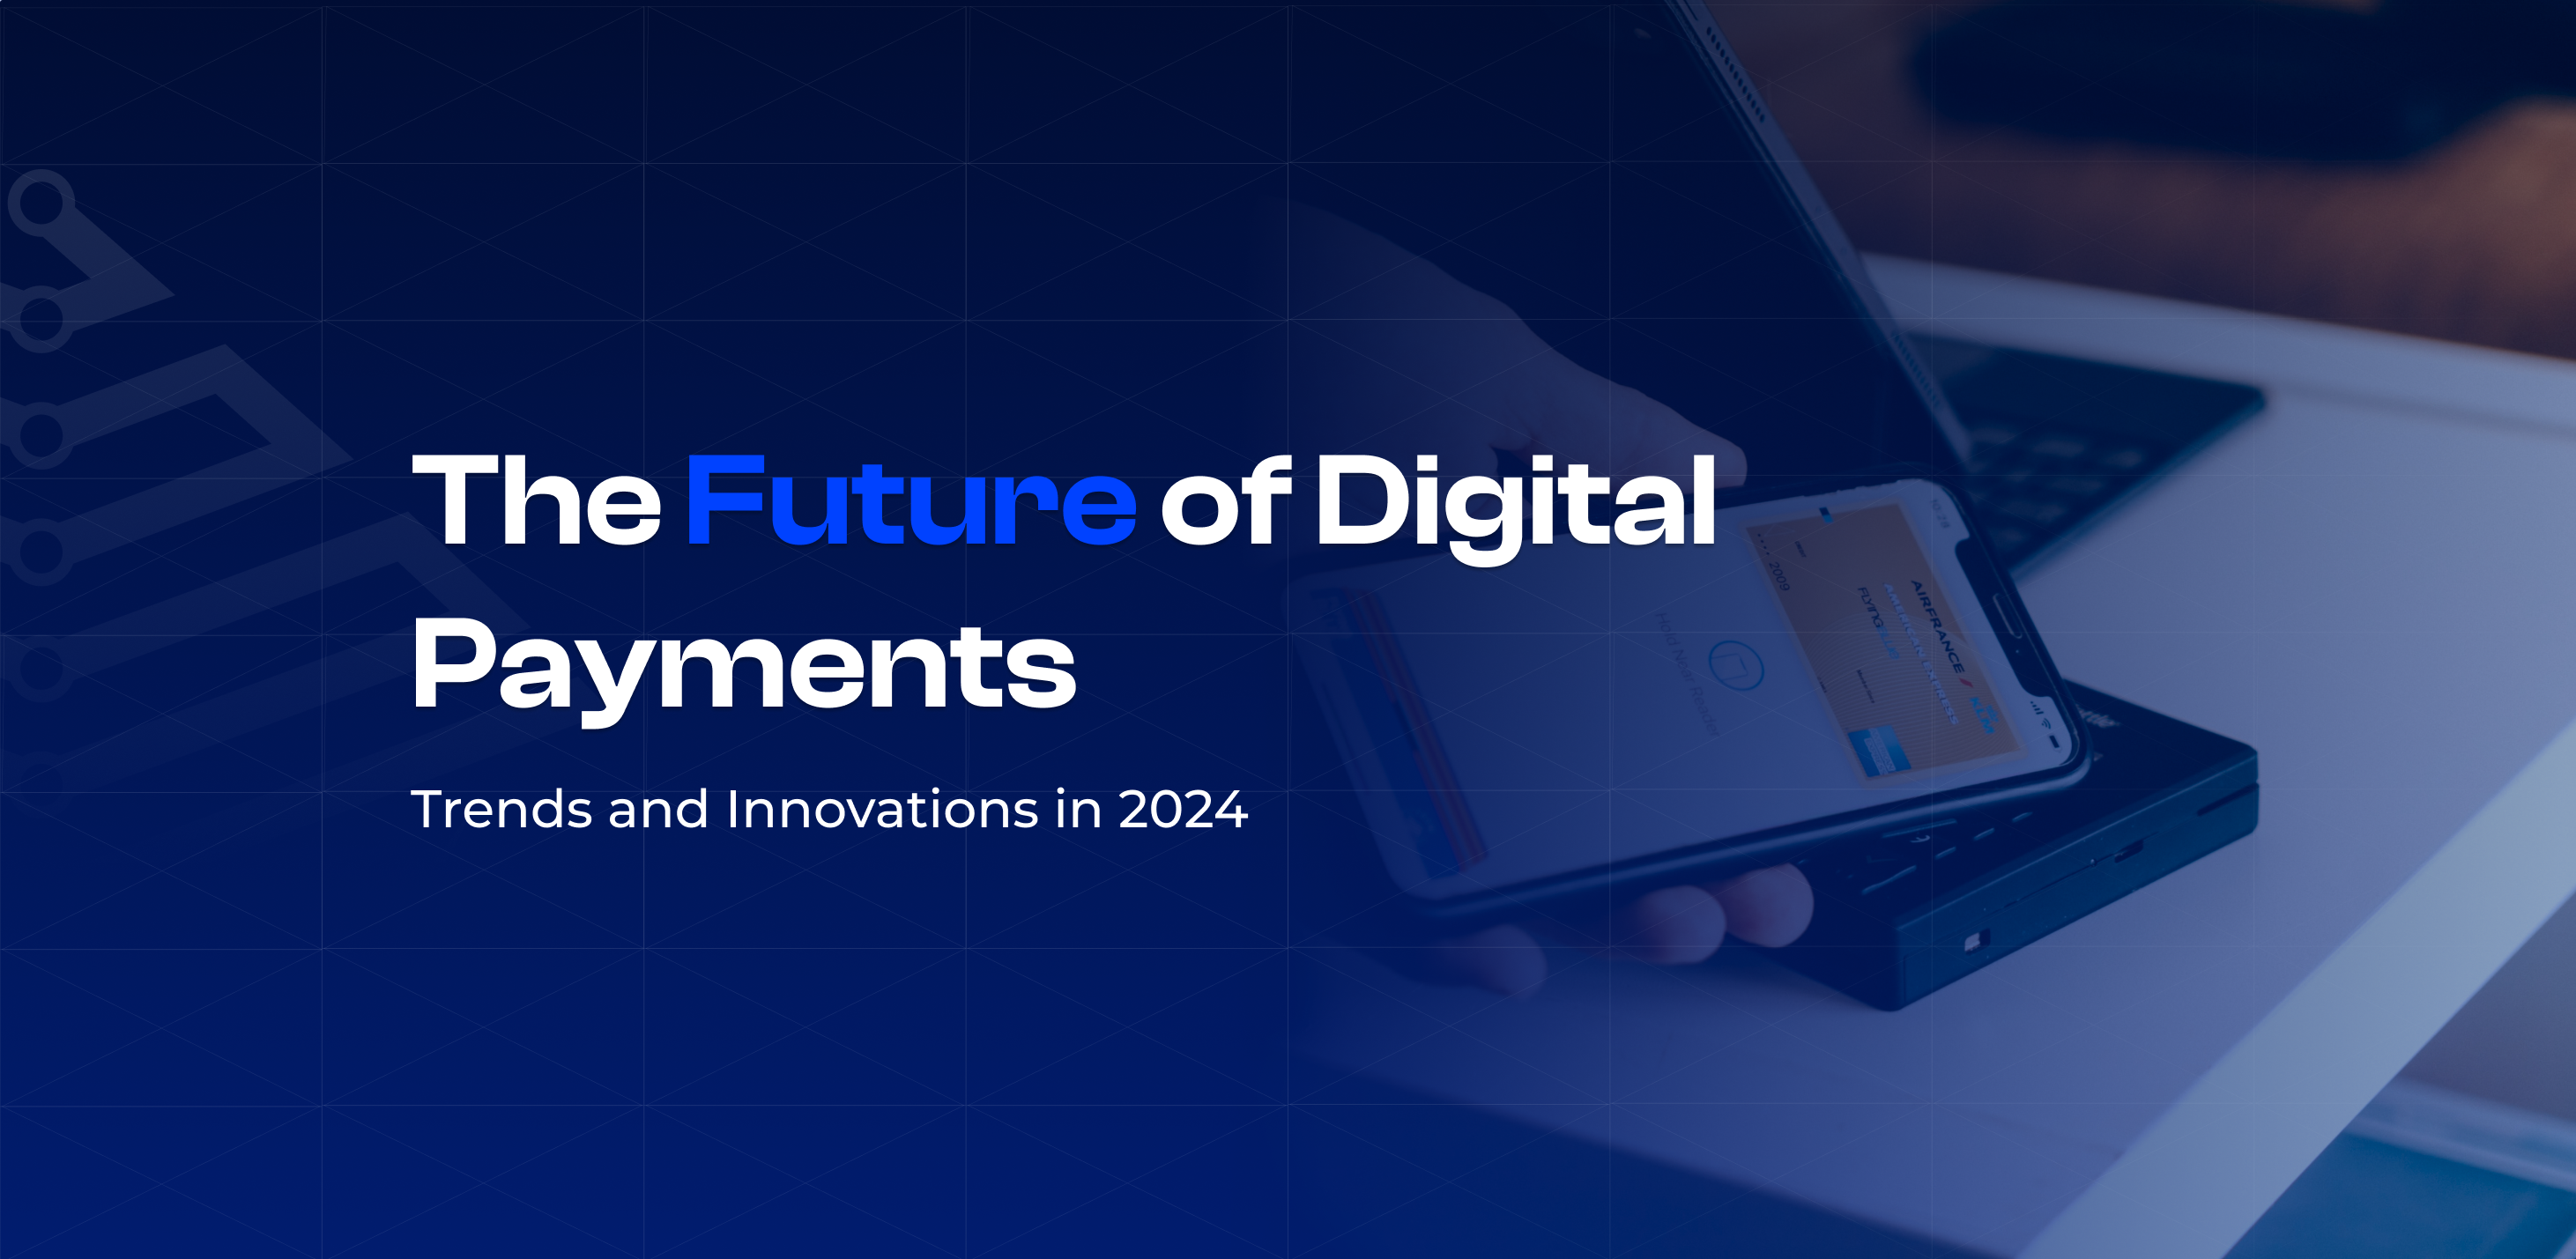 The Future of Digital Payments: Trends and Innovations in 2024